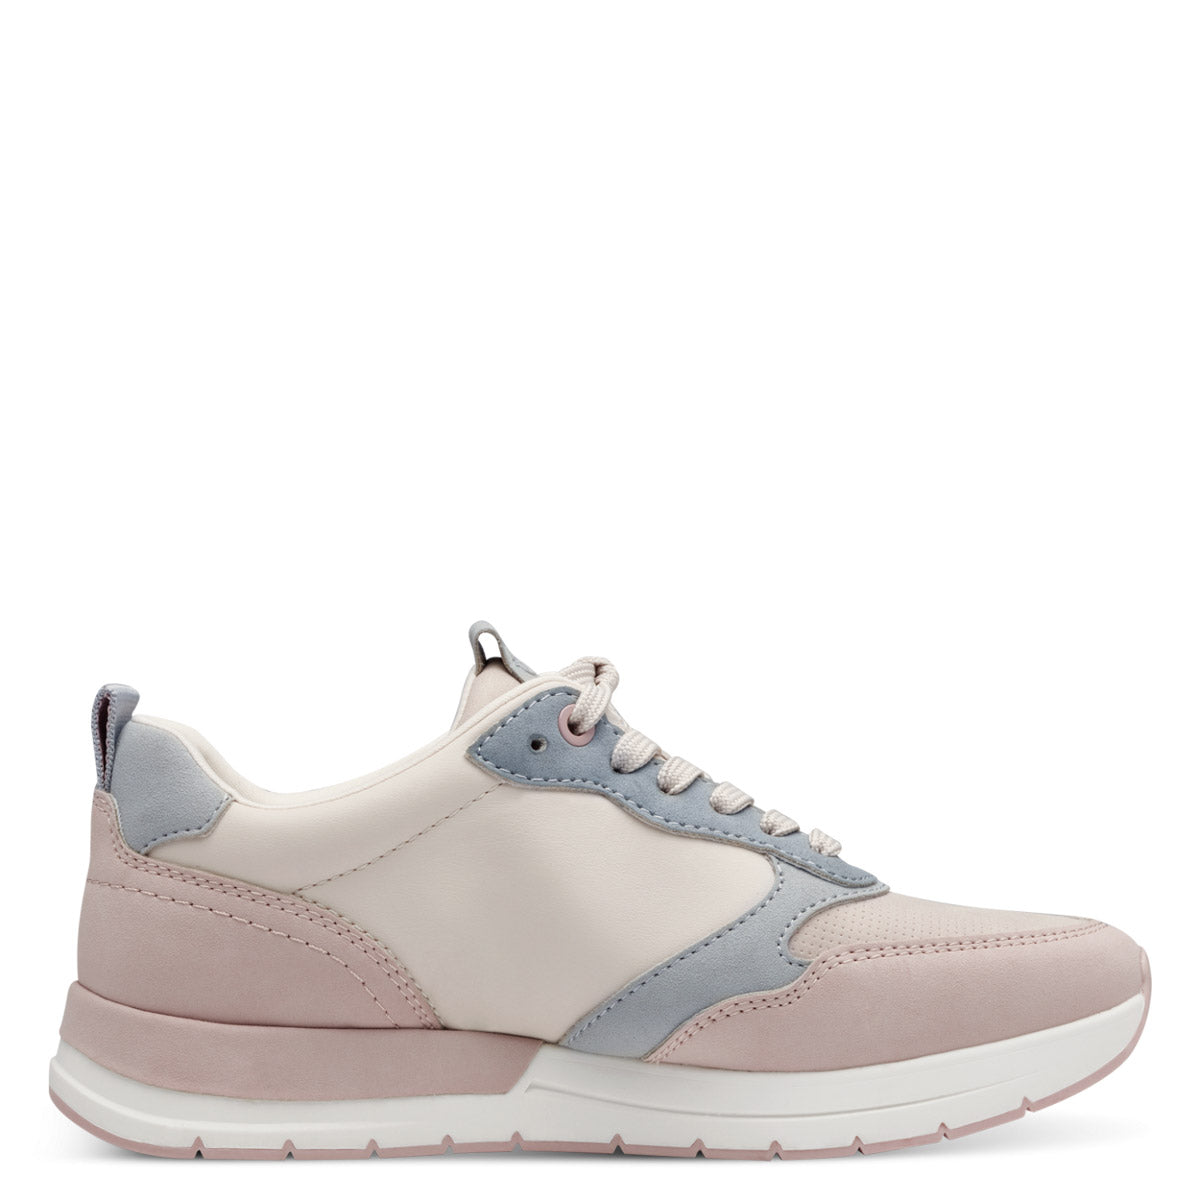  Interior view of Tamaris pastel sneaker, highlighting the textile decksole and unlined structure.